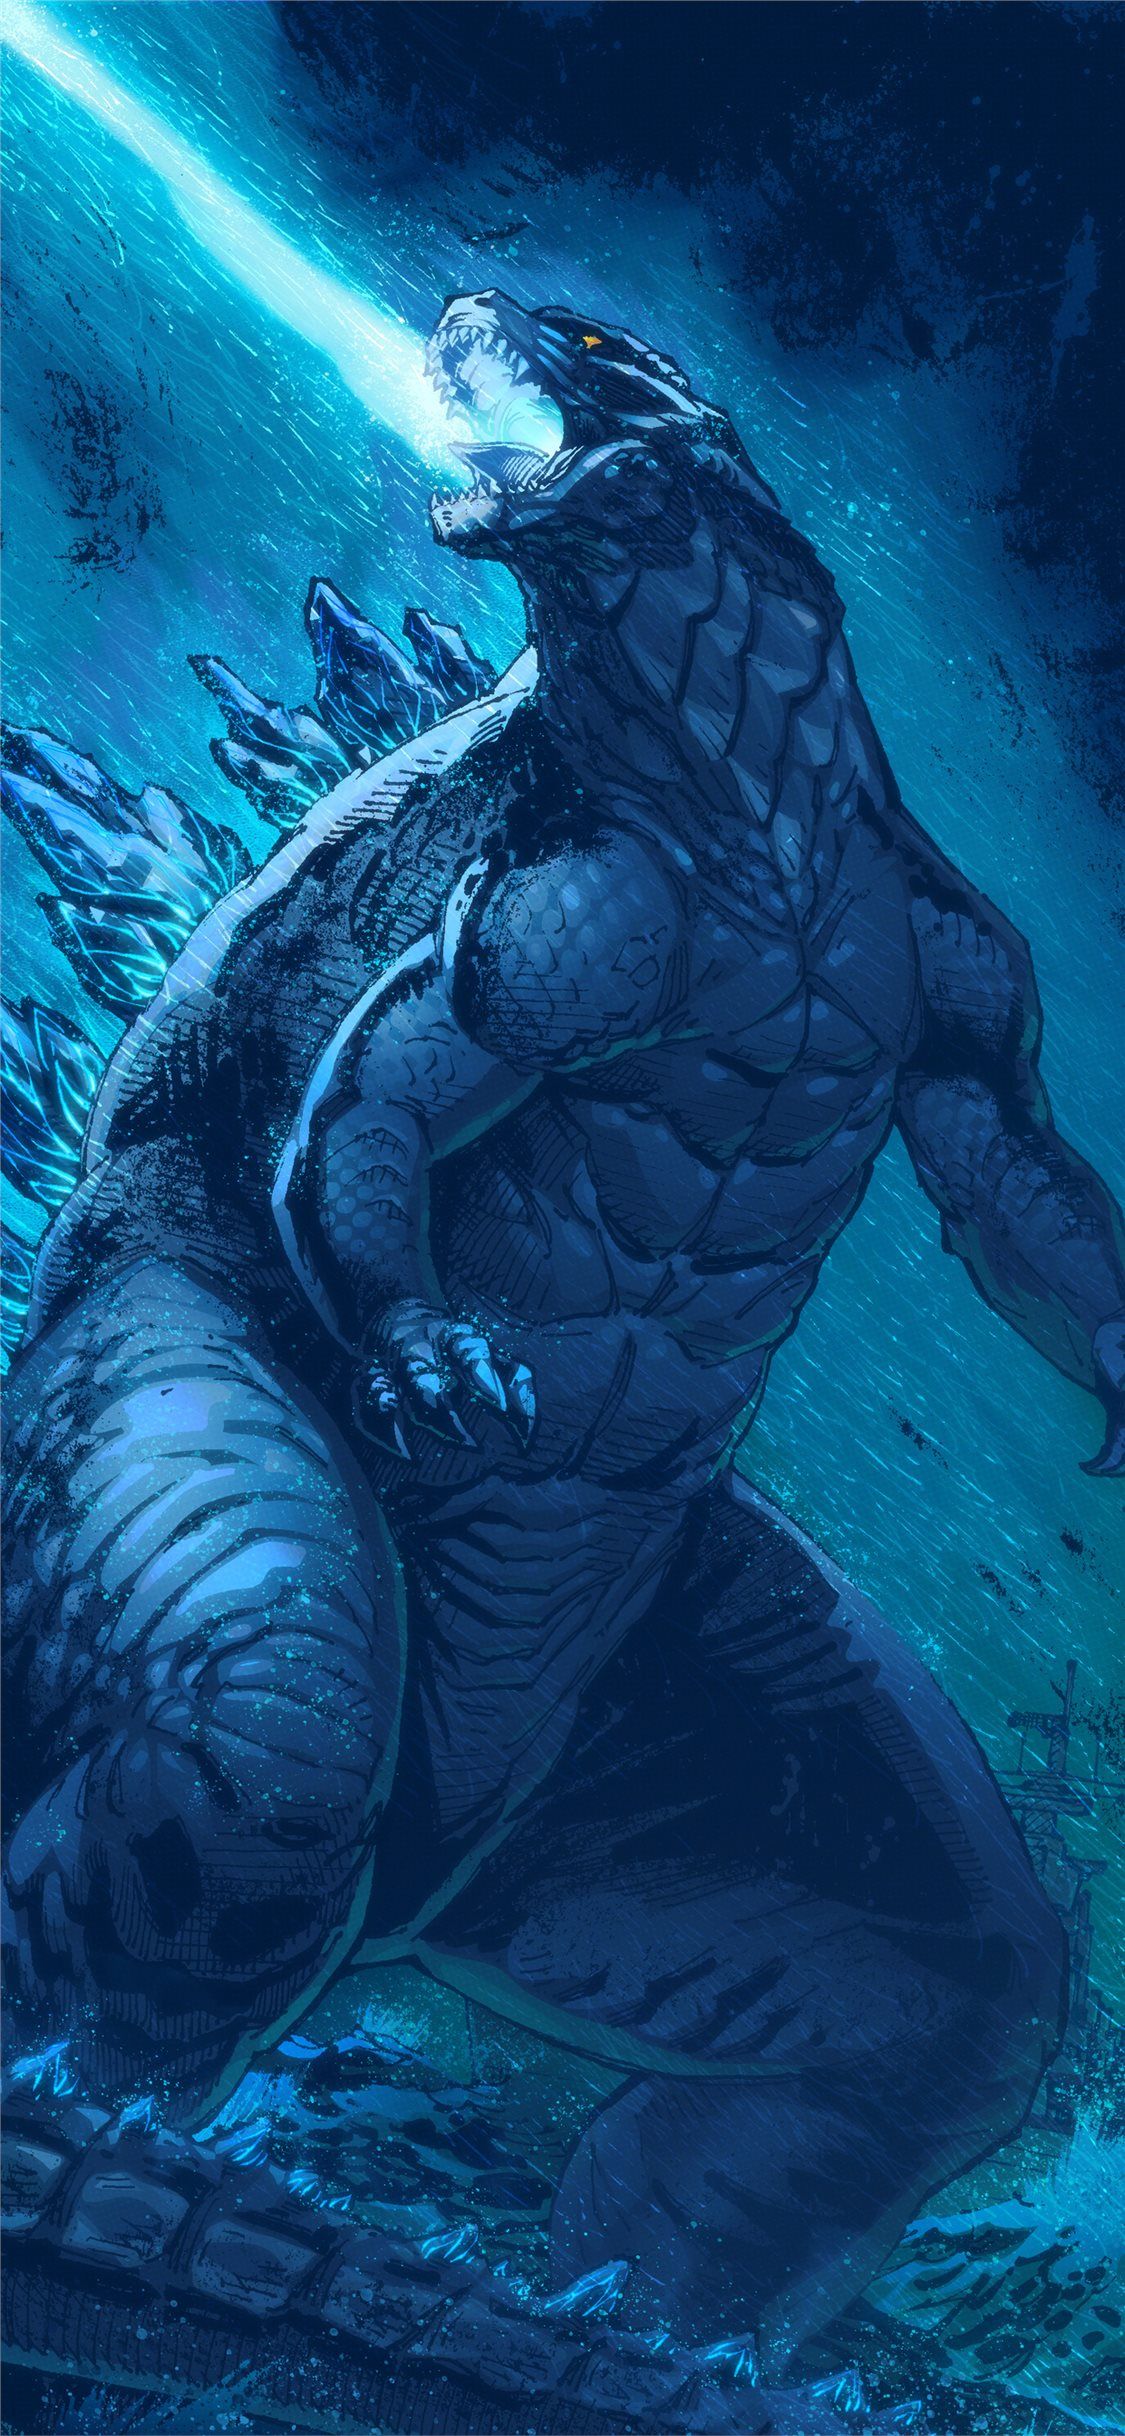 Free download the artwork godzilla king of the monsters wallpaper , beaty your iphone. #Godzilla King Of Th. Godzilla wallpaper, Godzilla, Tumblr iphone wallpaper